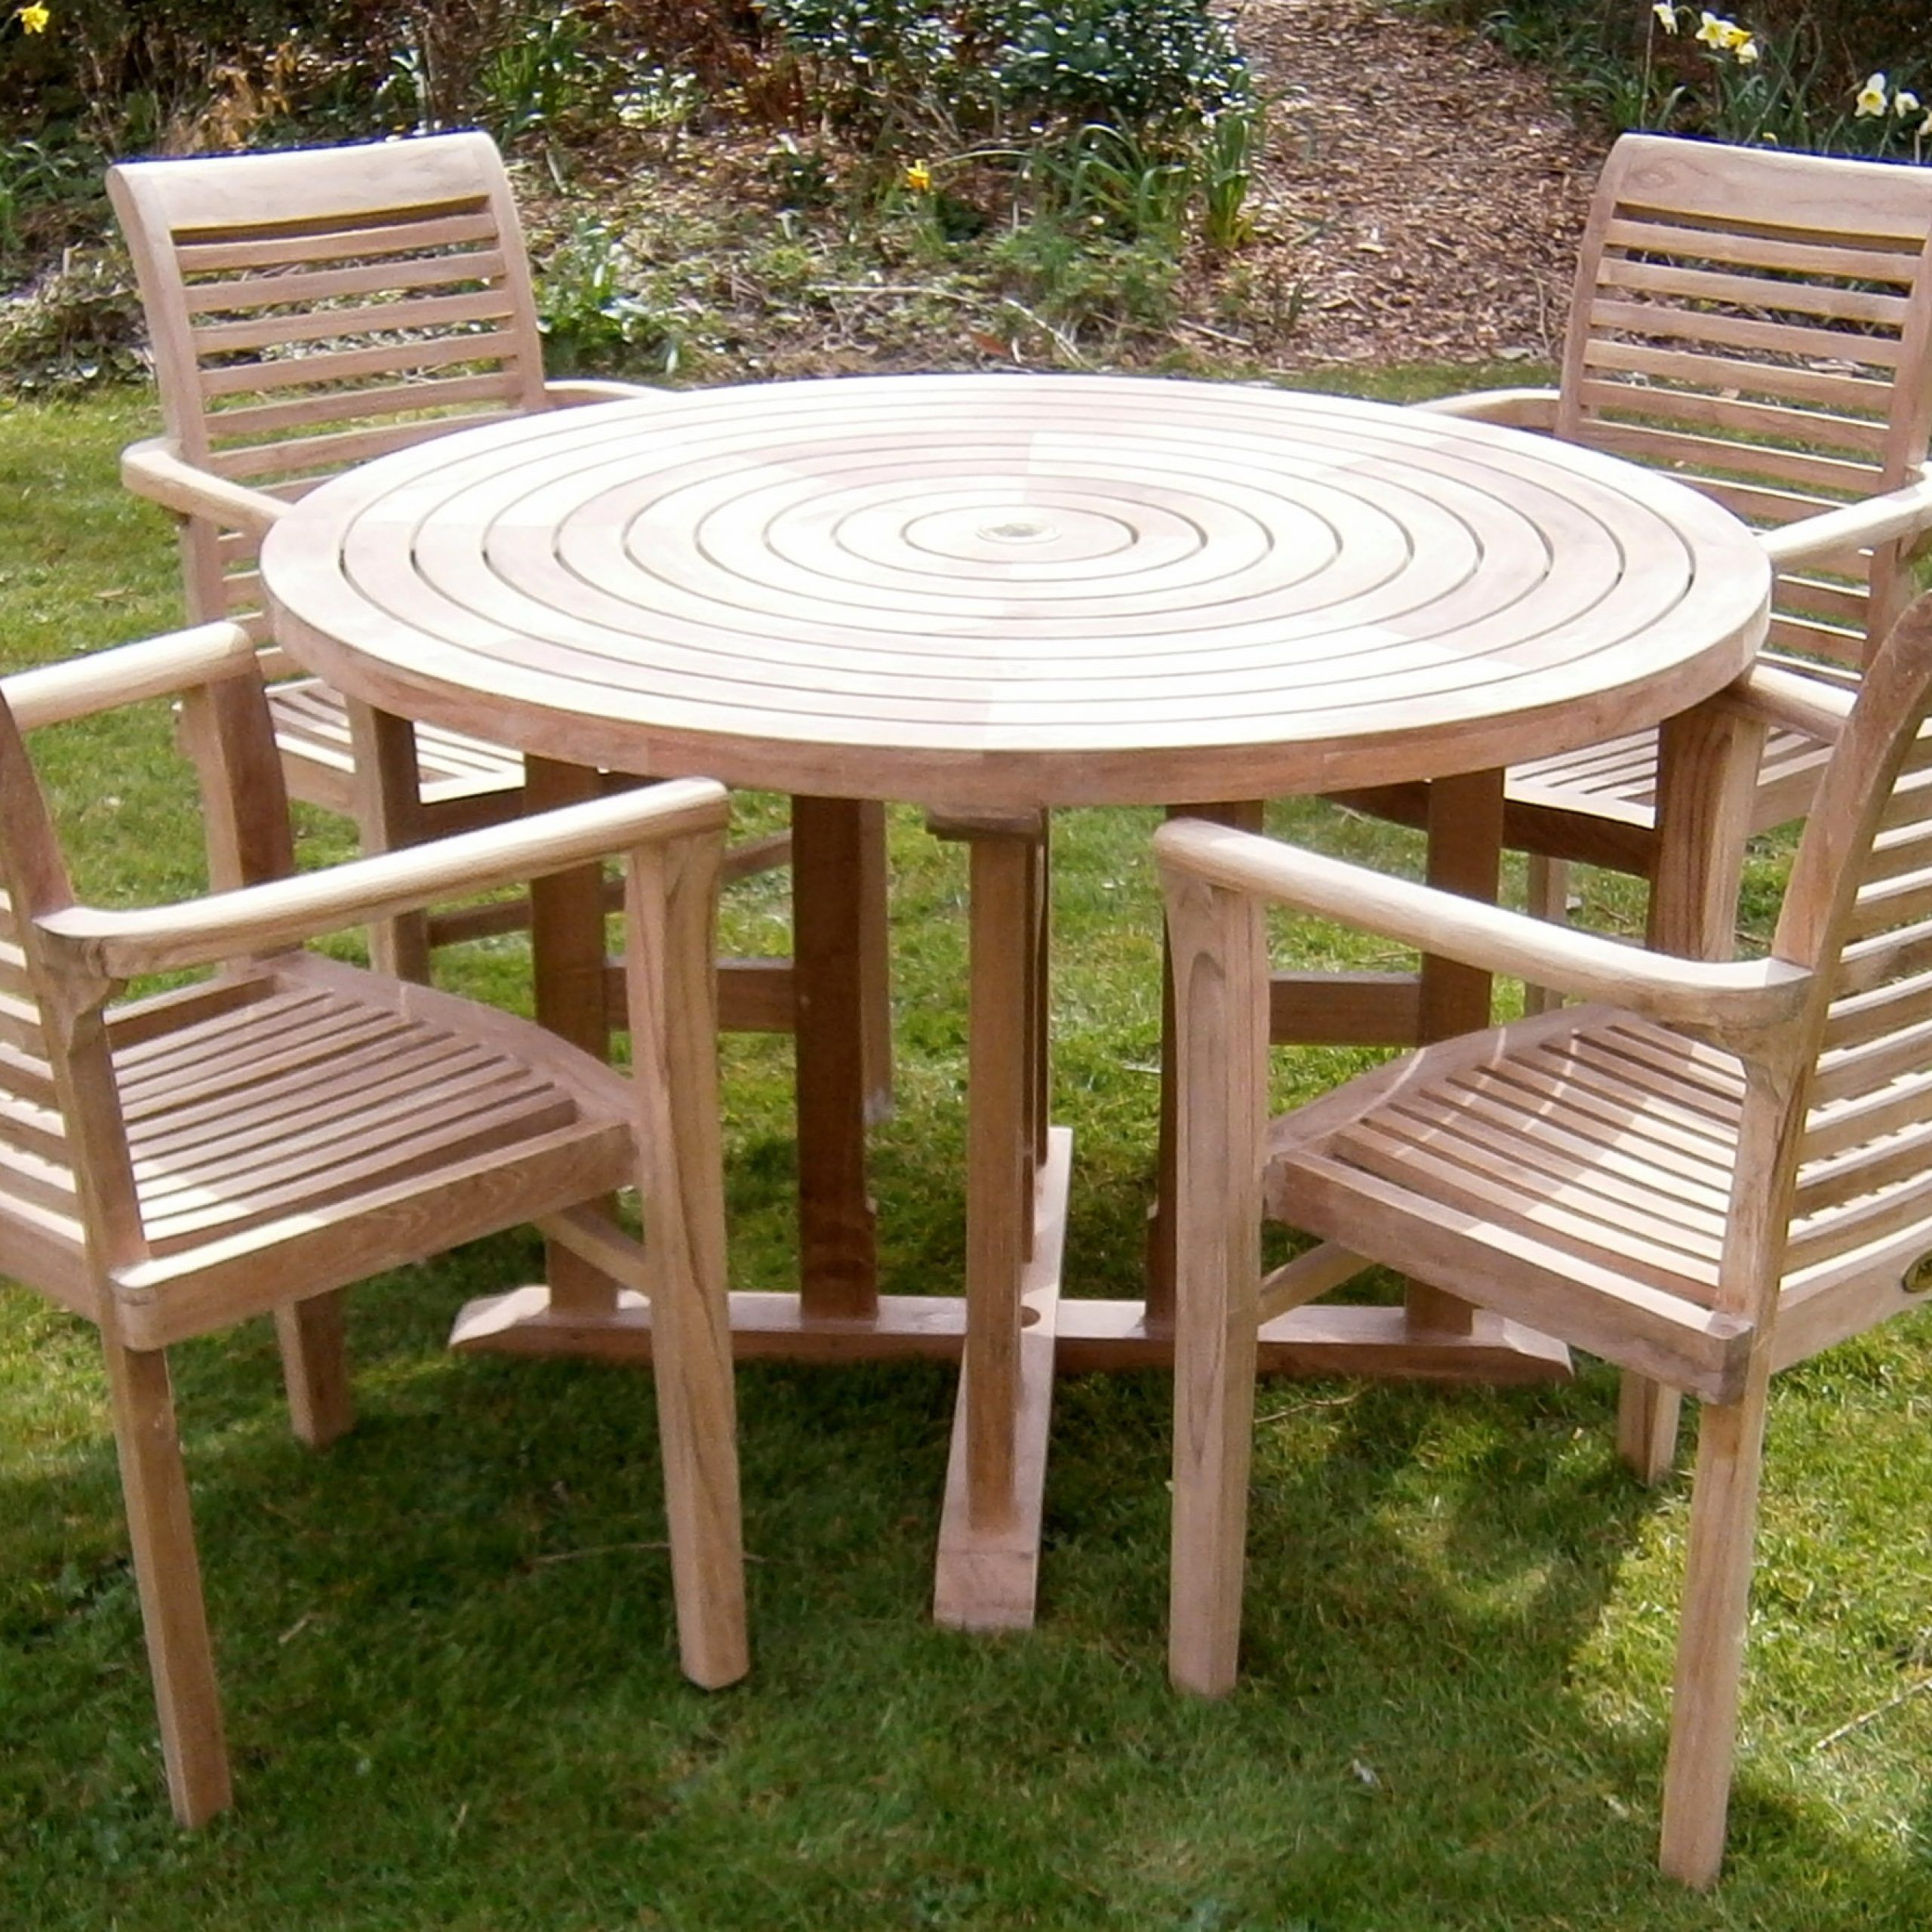 Turnworth Teak Ring Table And Chairs – Chairs And Tables Uk – Teak Intended For Teak Wood Outdoor Table And Chairs Sets (View 14 of 15)